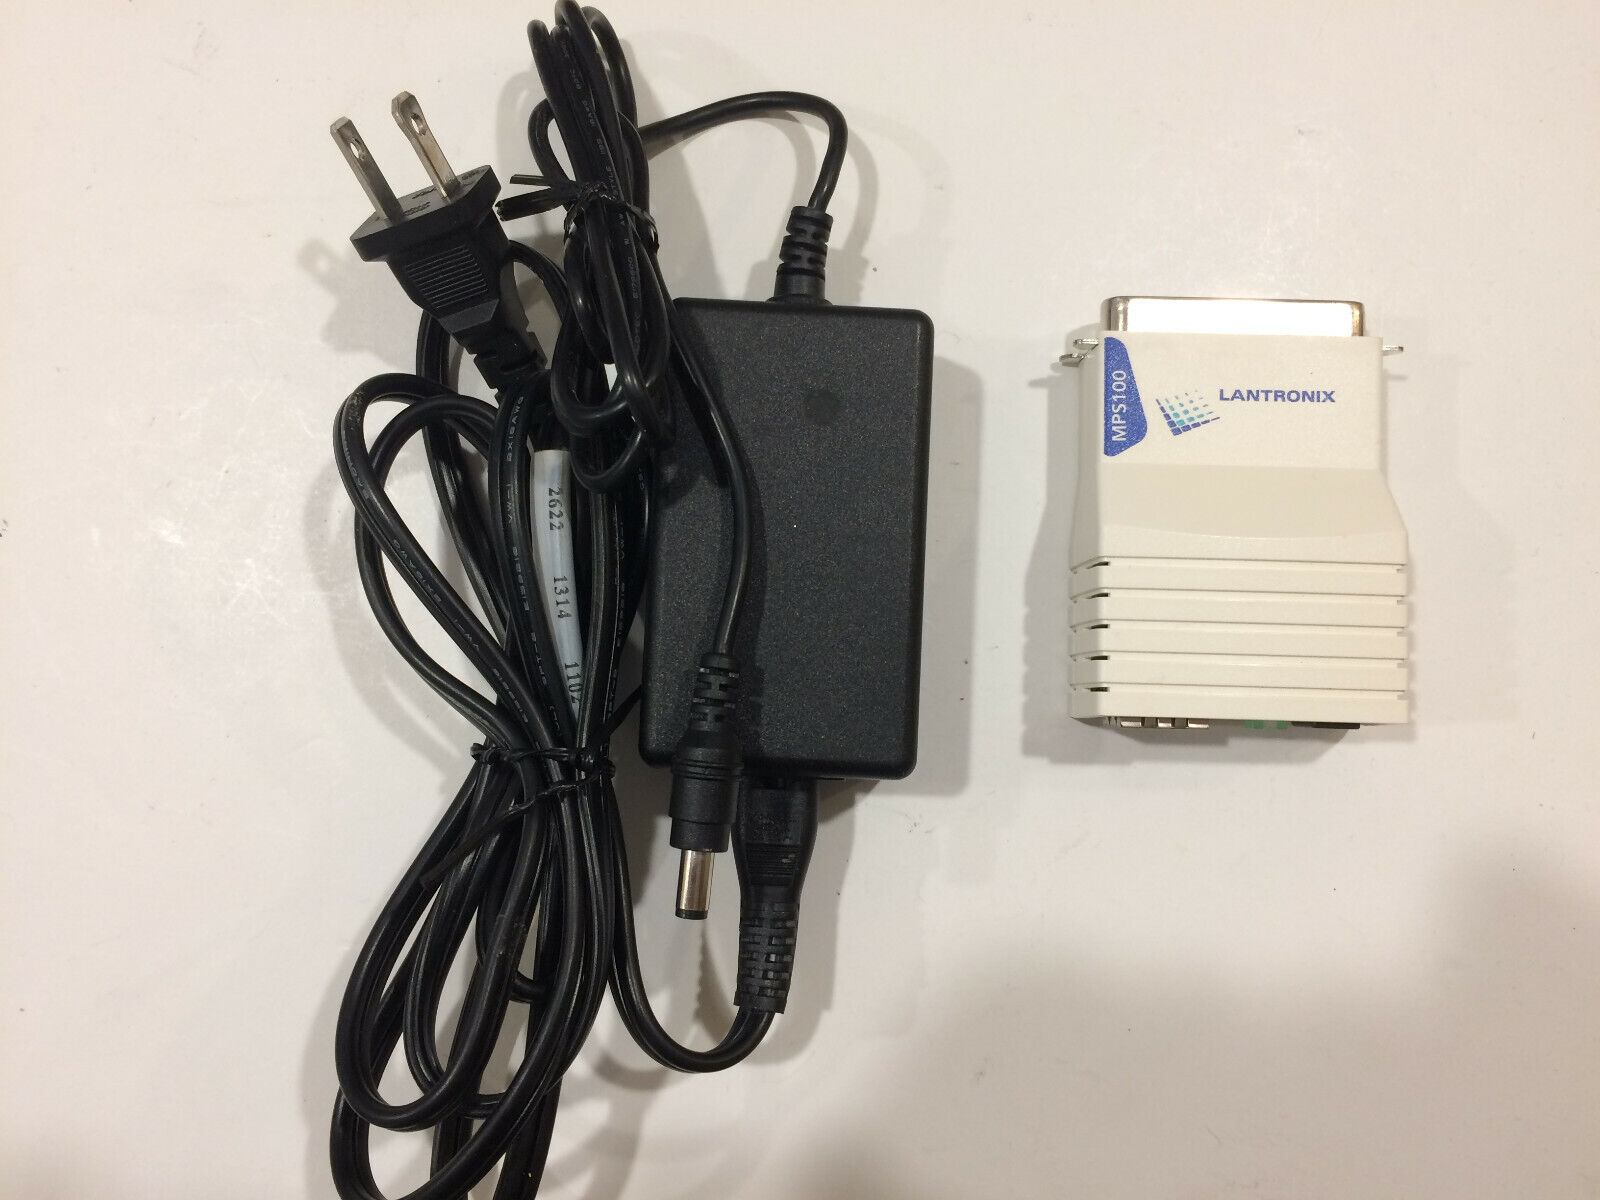 Lantronix MPS100 MPS 100 10/100 Ethernet Micro Print Server and AC Adapter 